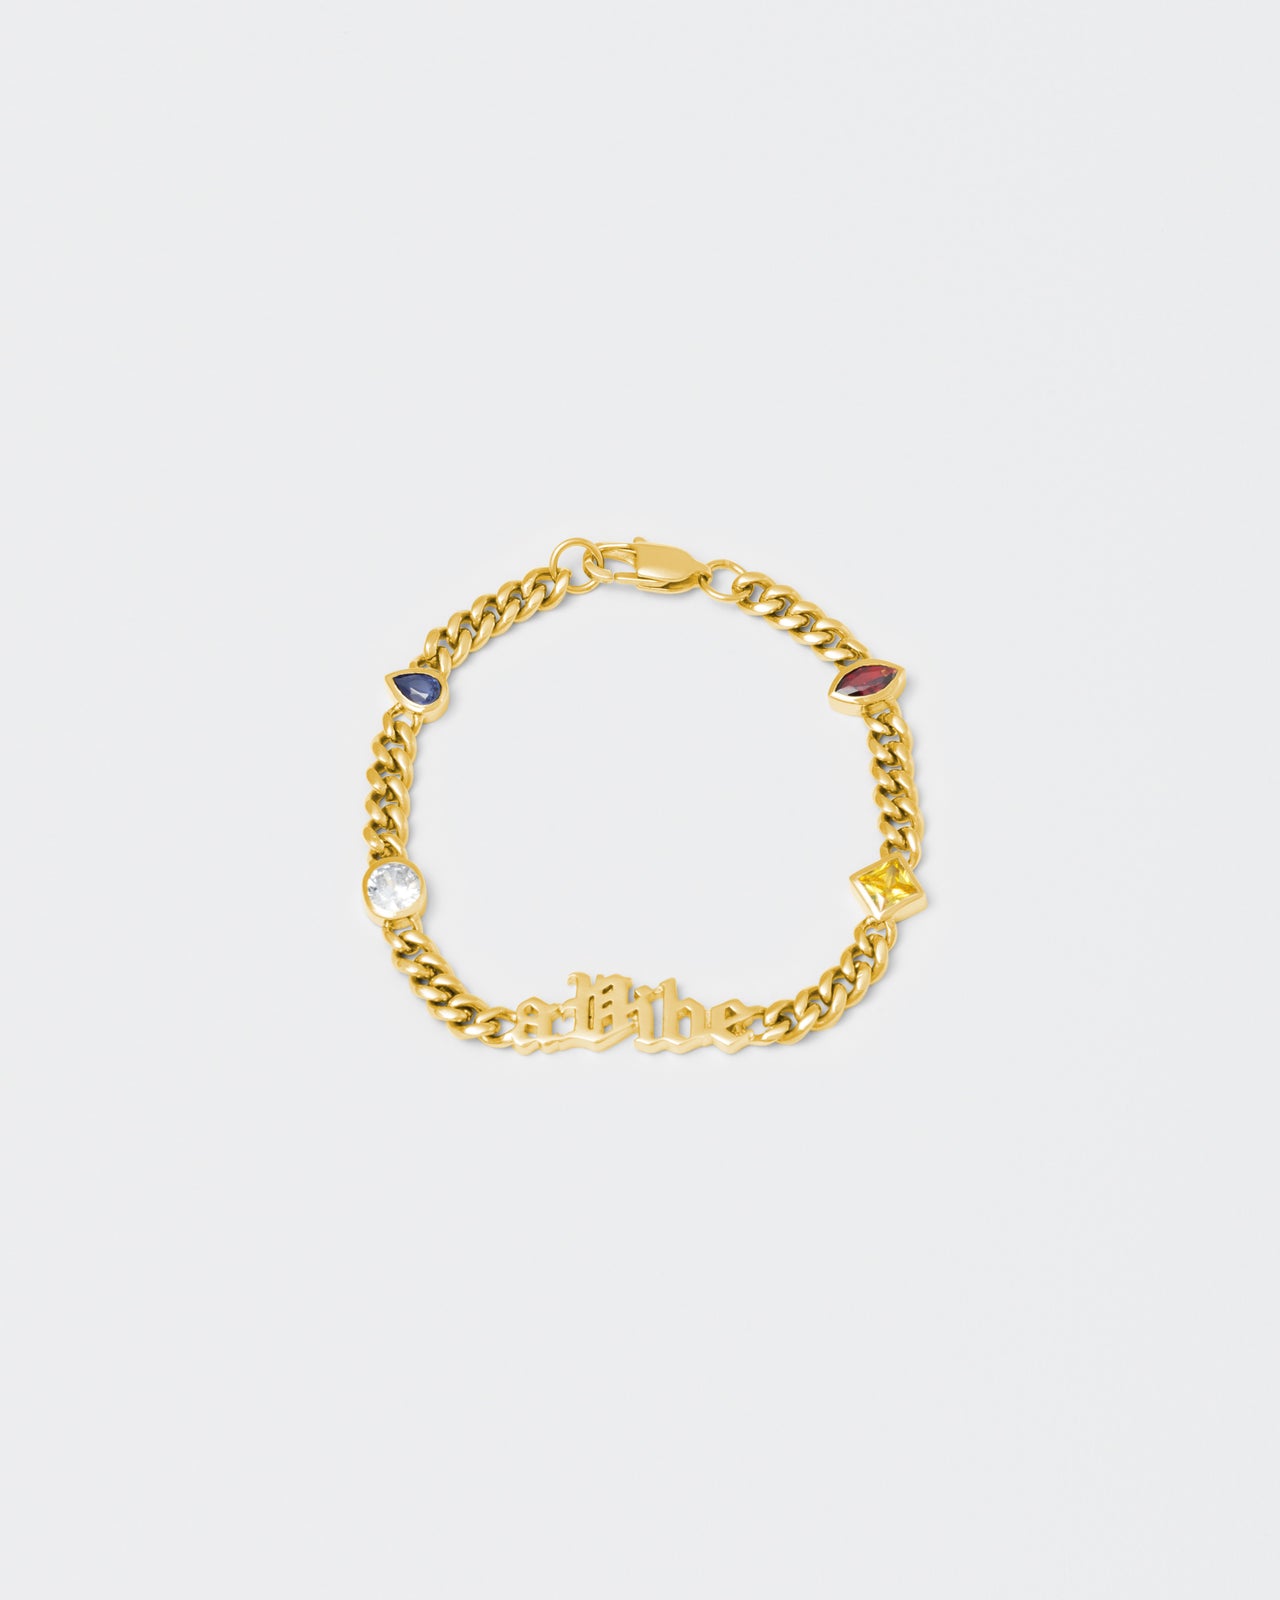 A Vibe cuban chain bracelet with 18kt yellow gold coating, mixed shape bezel stones in diamond white, yellow, garnet, tanzanite and "A Vibe" central metal tag. Lobster clasp with logo